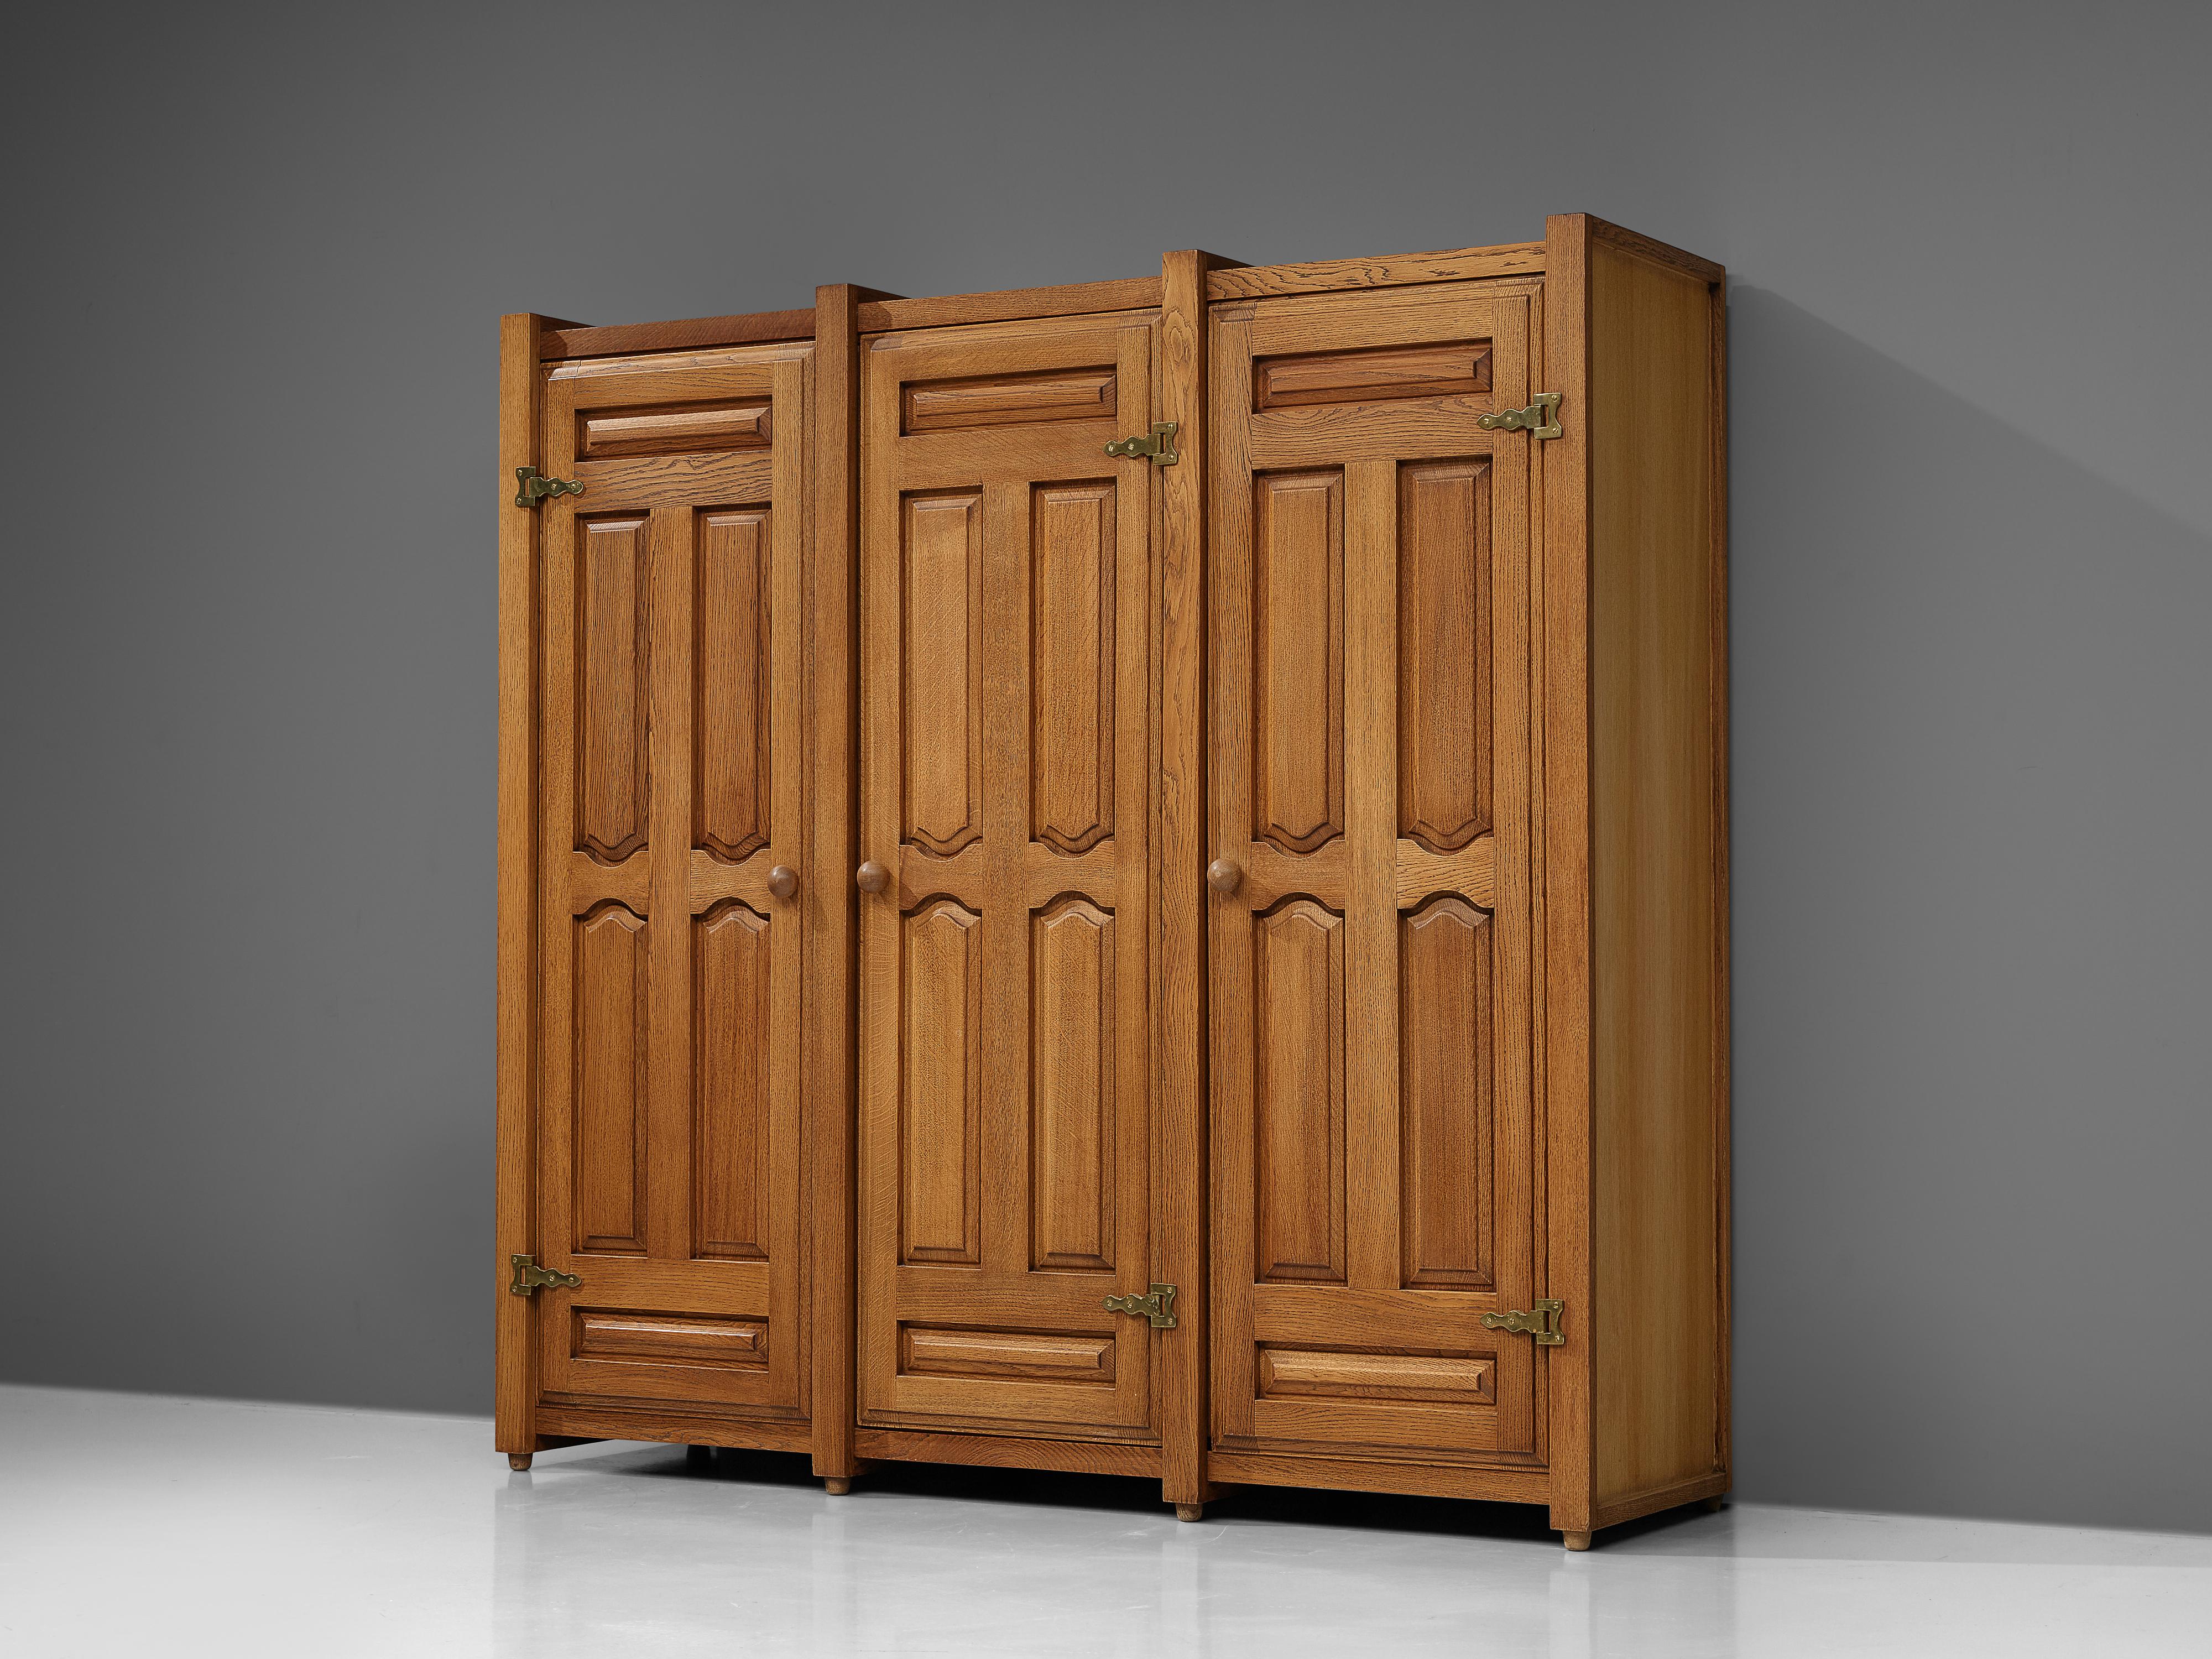 Guillerme et Chambron for Votre Maison, armoire or wardrobe, oak, brass, France, 1960s

This charming wardrobe is a good example of excellent woodworking by virtue of the graphical designed door panels illustrating geometrical wooden carvings, which